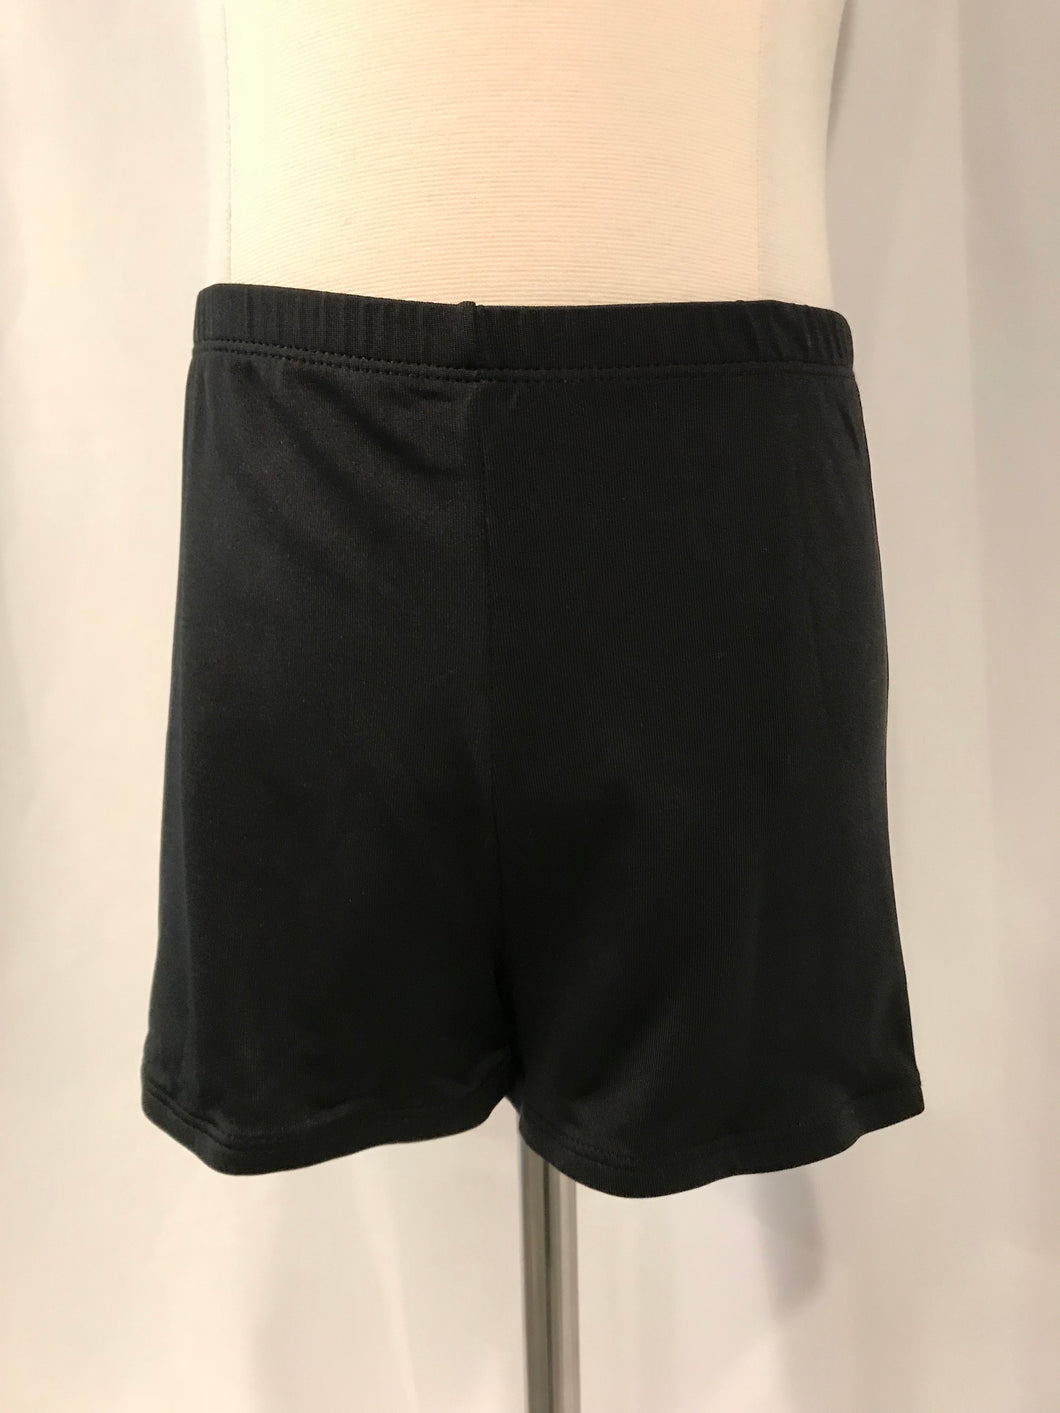 Body Wrappers Child's Black Dance Shorts